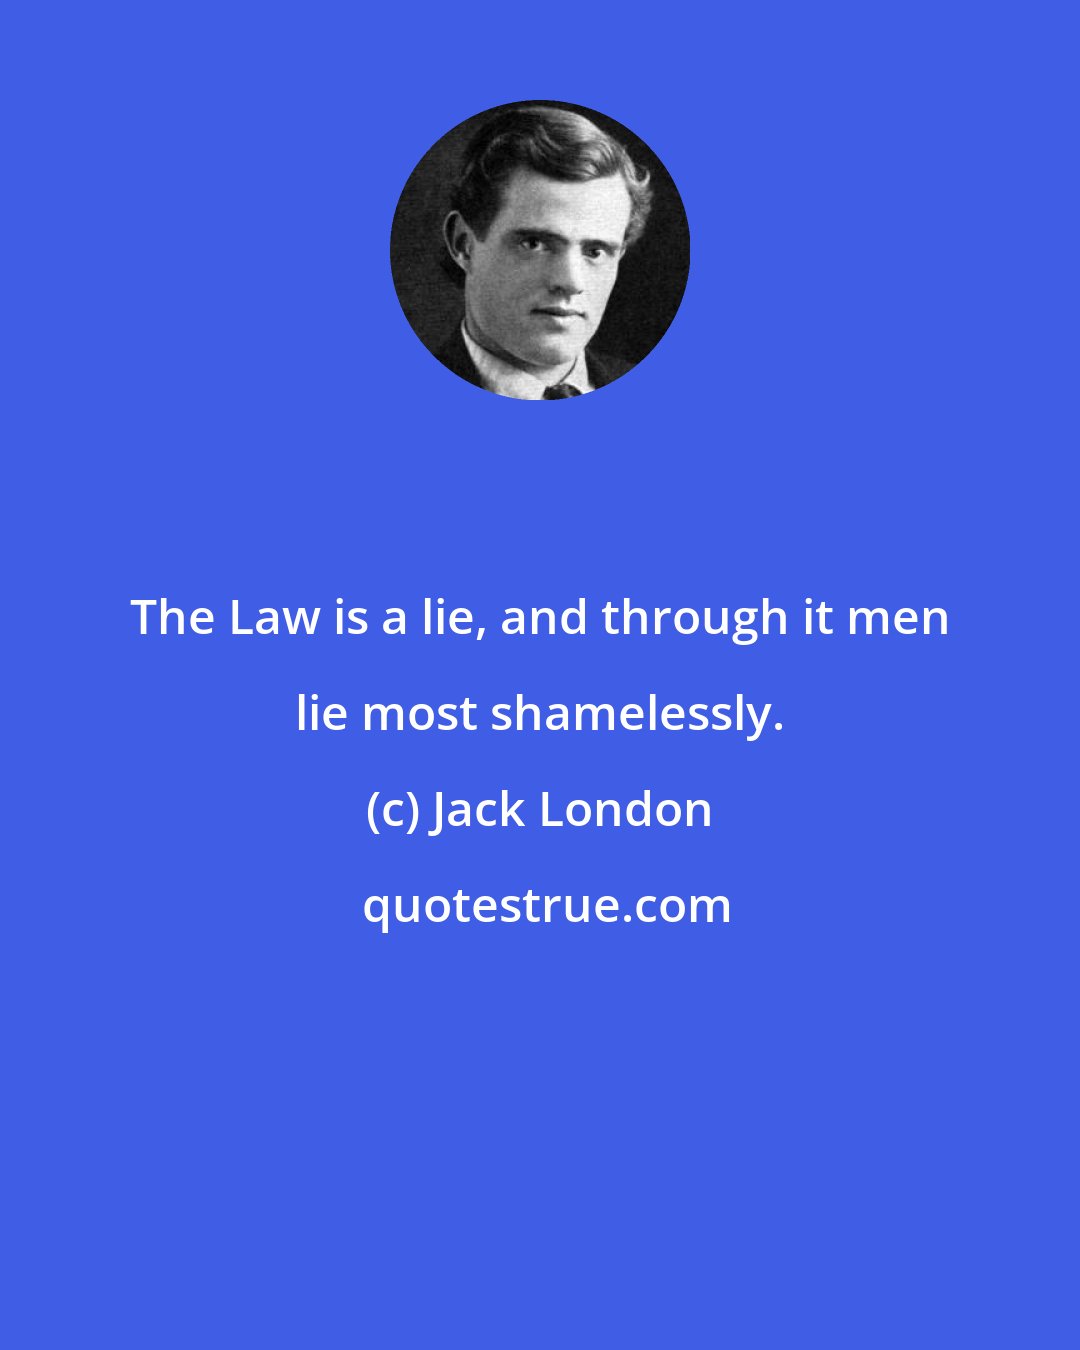 Jack London: The Law is a lie, and through it men lie most shamelessly.